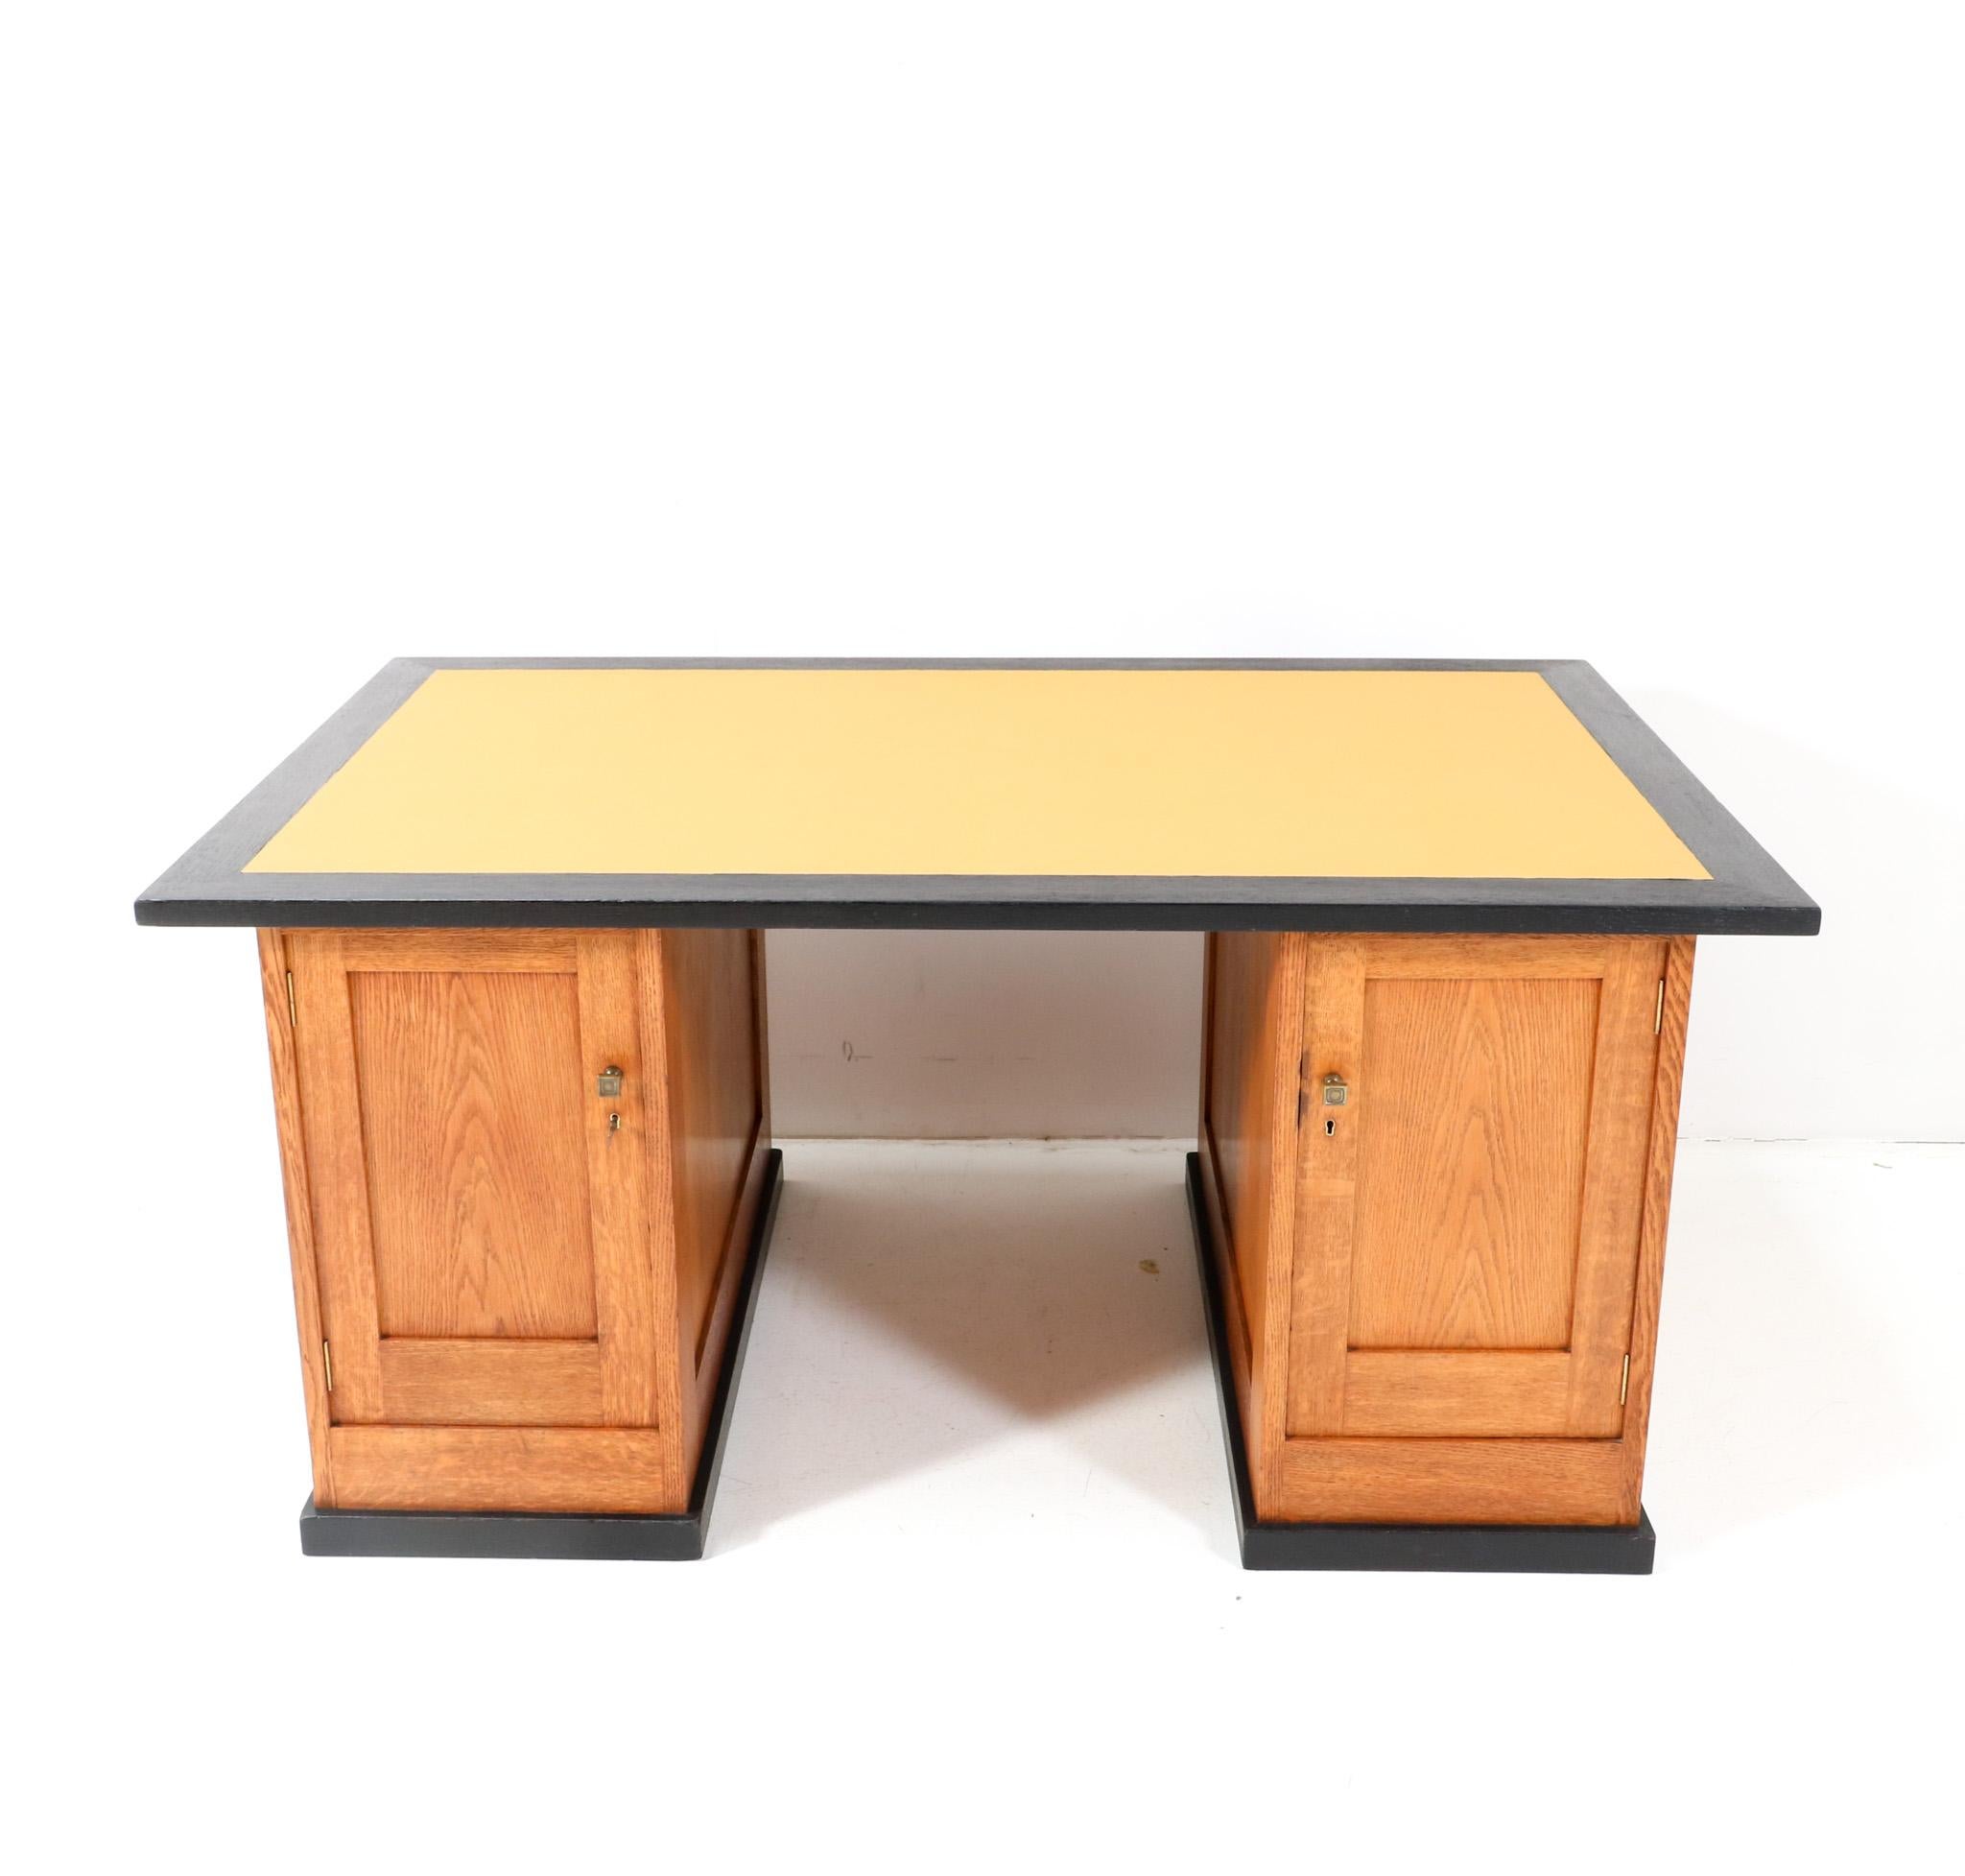 Magnificent and ultra rare Art Deco Modernist partner desk. Design by Hendrik Wouda for H. Pander & Zonen Den Haag. Striking Dutch design from the 1920s. Solid oak base with original patinated brass knobs on the four doors. Four original solid oak